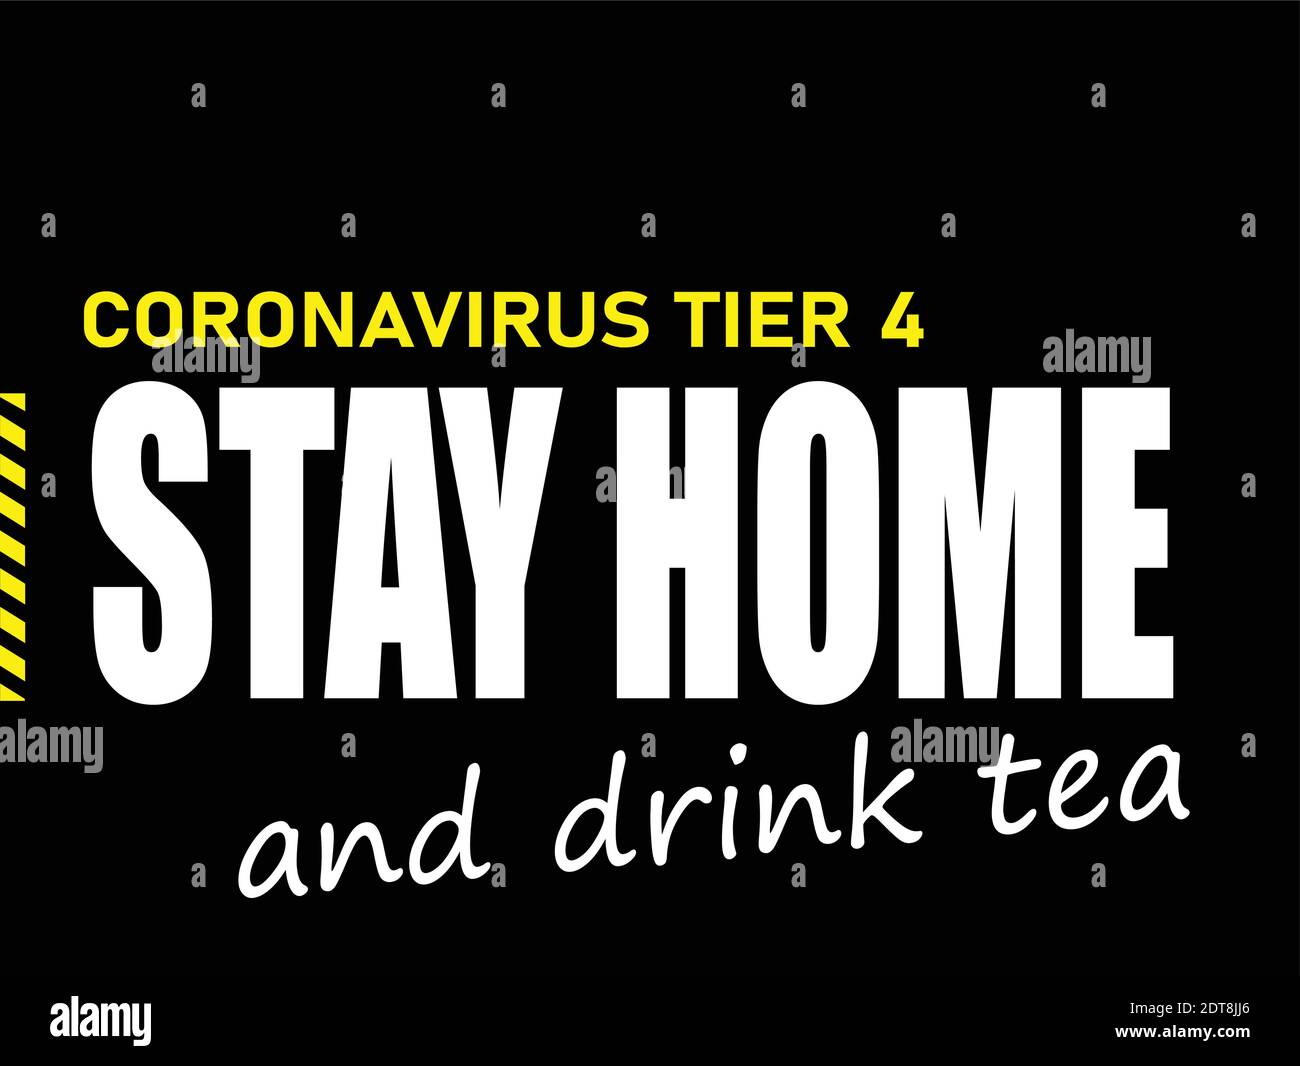 CORONAVIRUS TIER 4 STAY HOME. Poster on a black background. Used in the United Kingdom to alert the public about the higest lockdown level. VECTOR Stock Vector